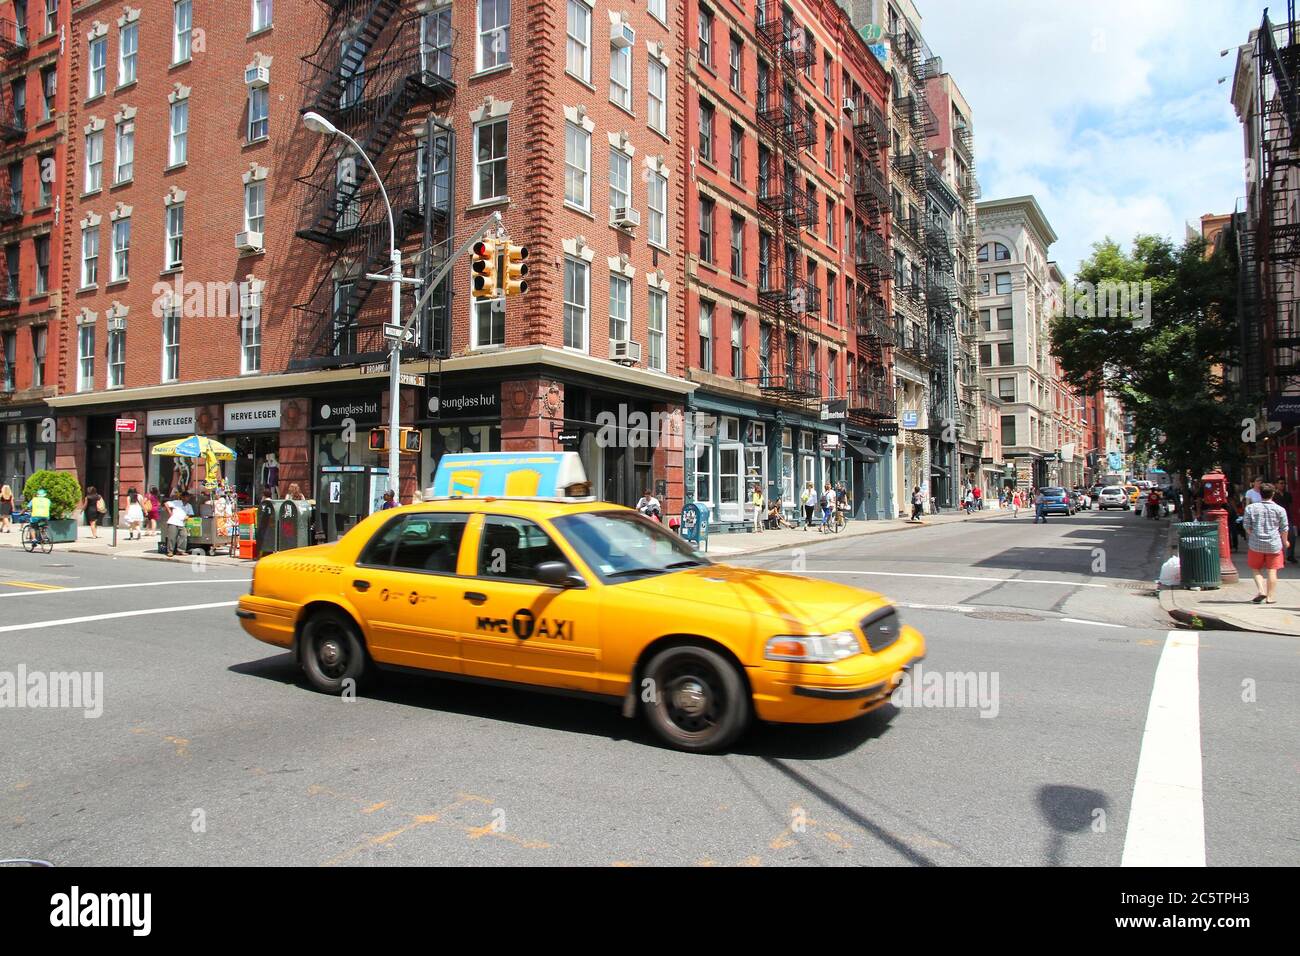 NEW YORK, USA - JULY 2, 2013: People ride yellow taxi cab in SoHo, New York. As of 2012 there were 13,237 yellow taxi cabs registered in New York City Stock Photo